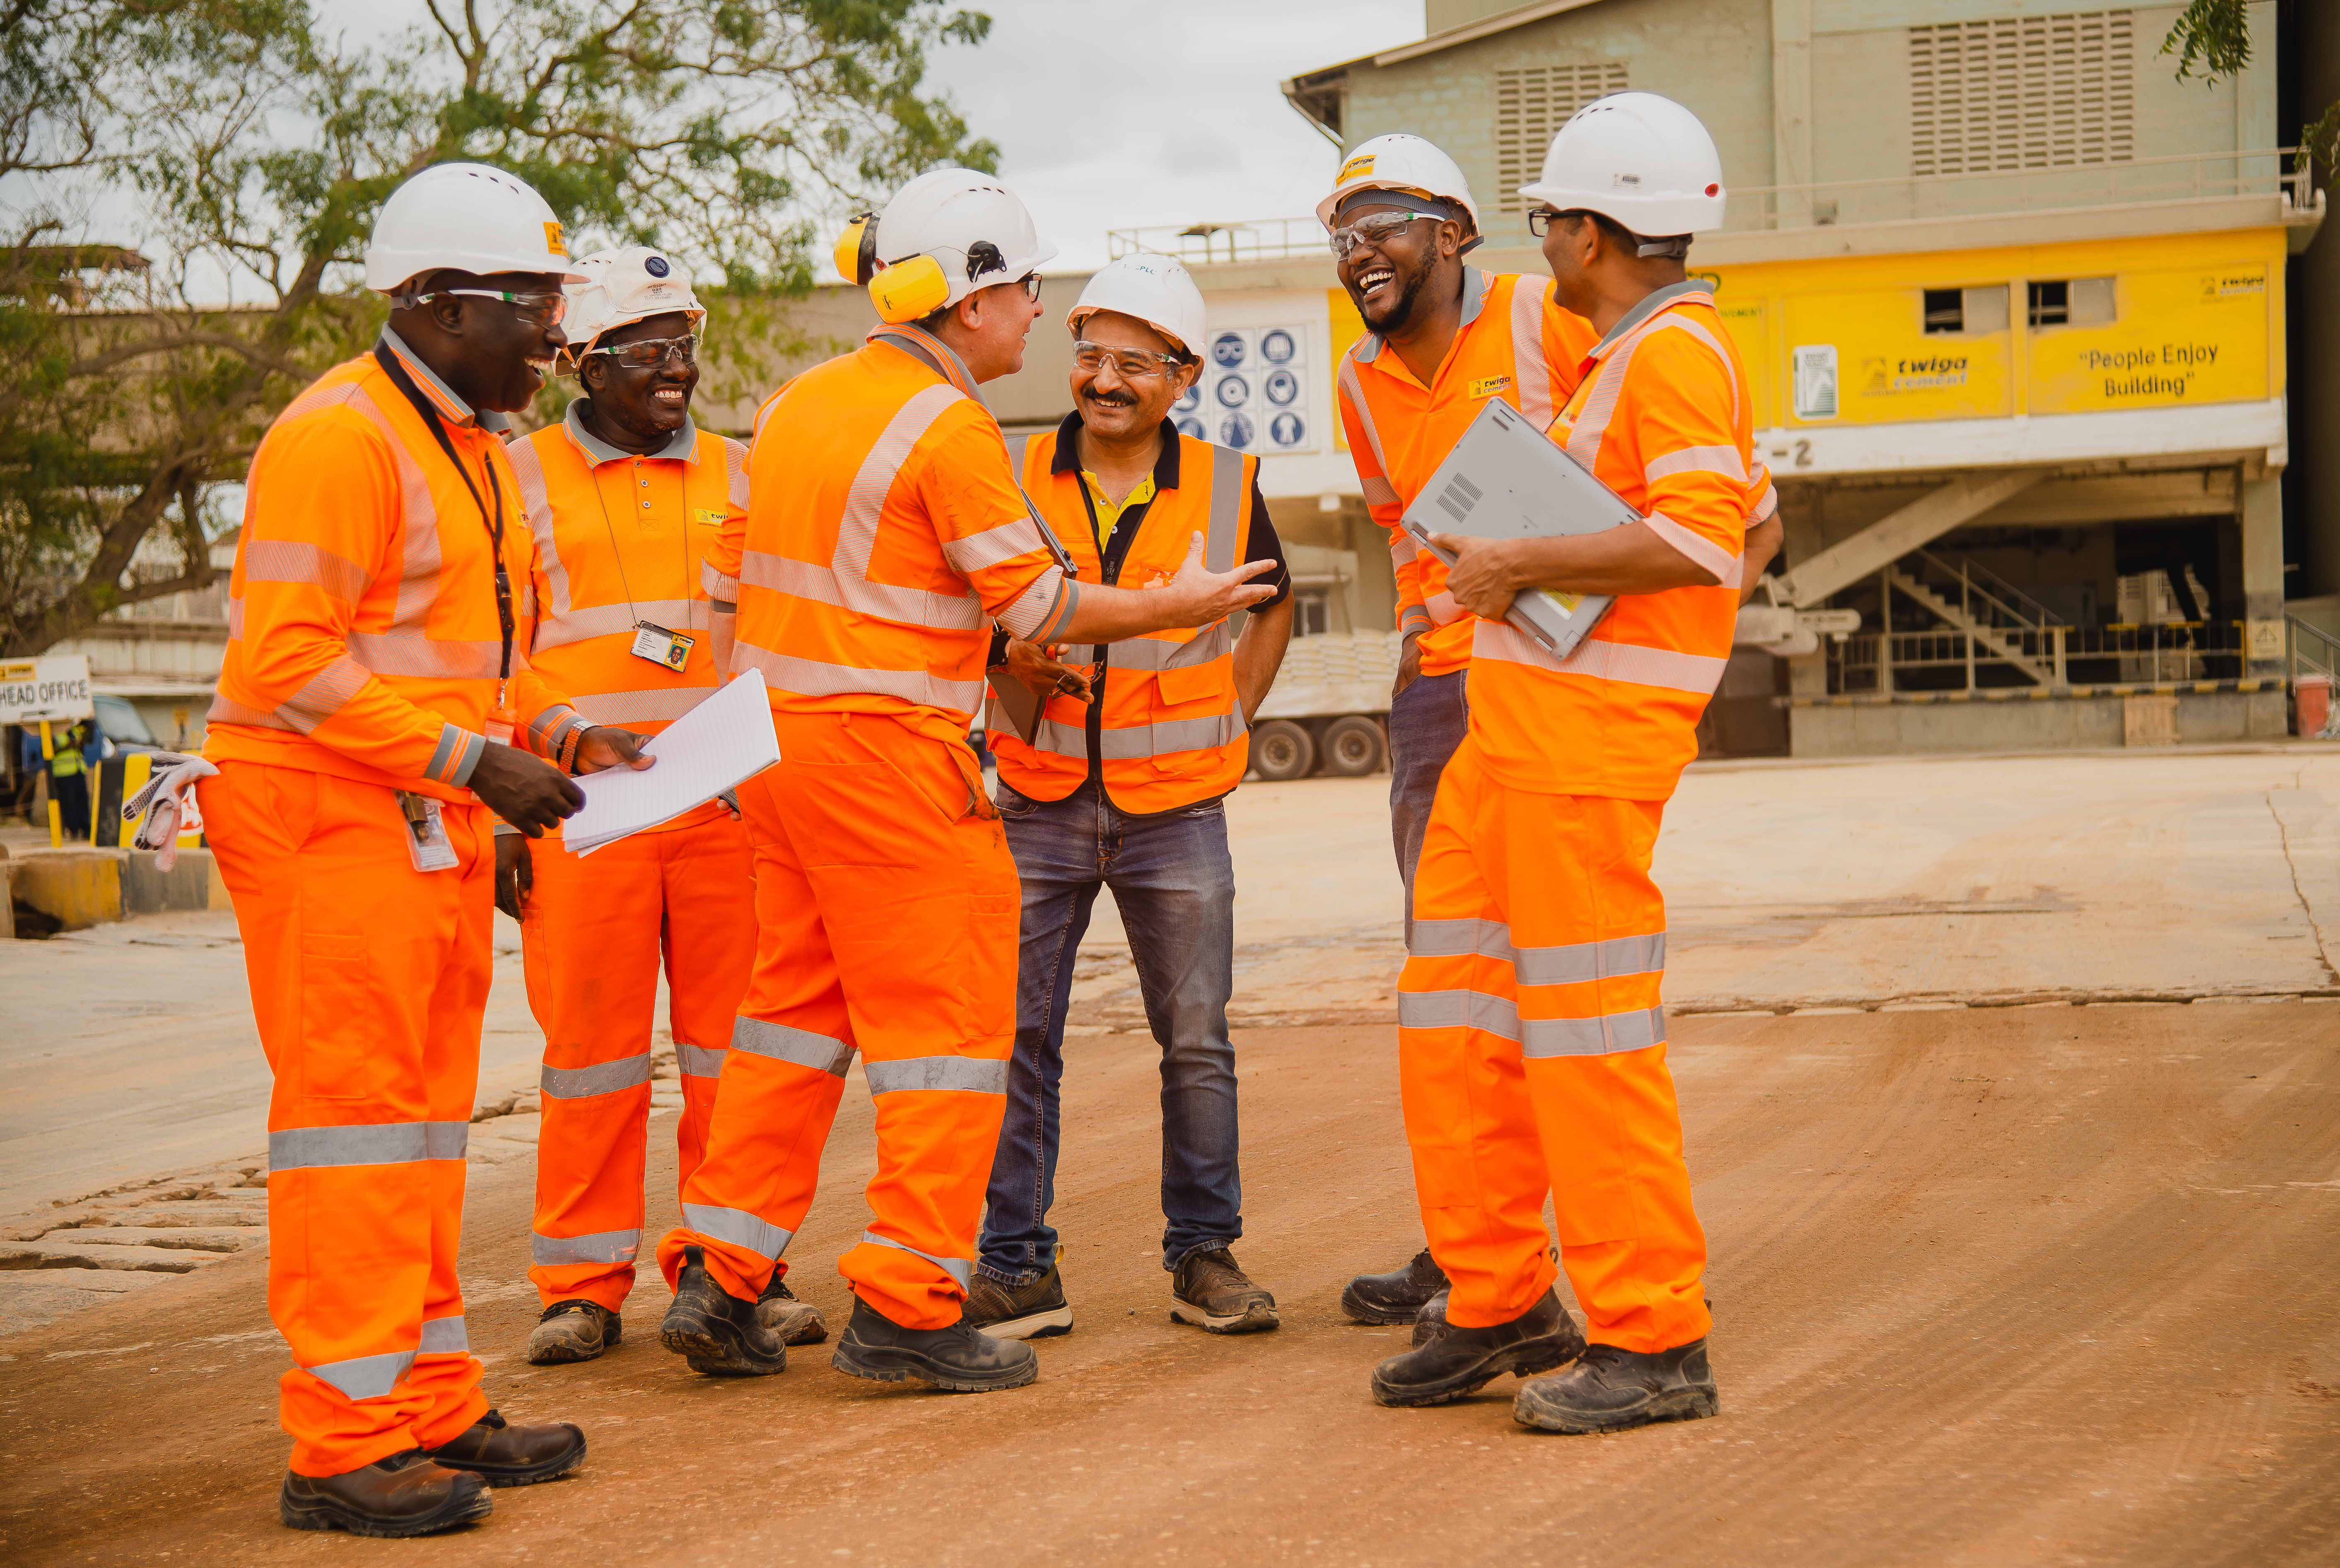  a group of six individuals wearing high-visibility orange safety vests and white hard hats. They are gathered in what appears to be a construction or industrial site. One person is holding open a set of plans or documents, which the group seems to be discussing. 